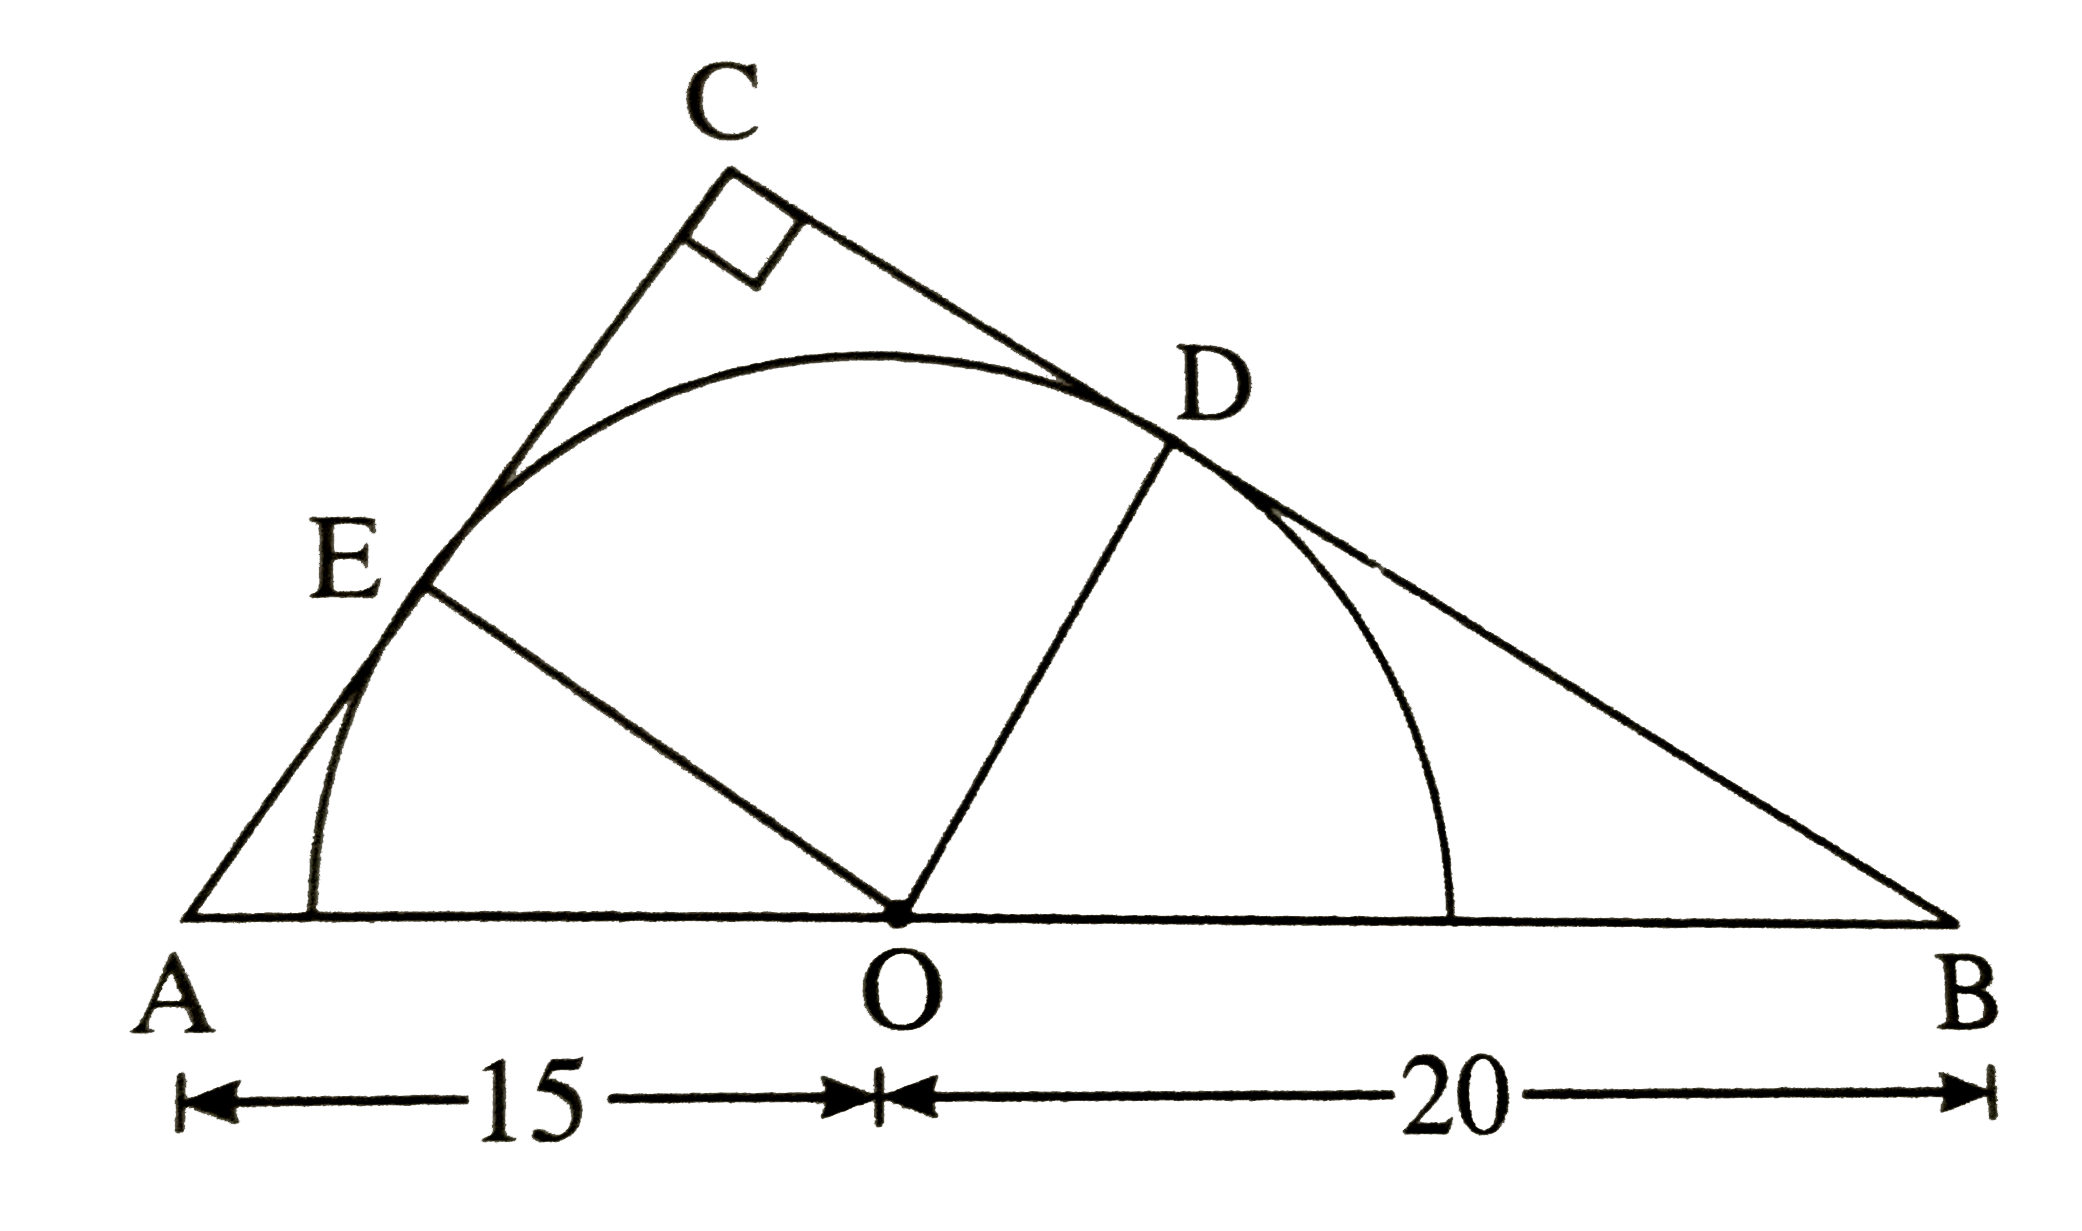 In the figure, a semicircle with its diameter on the hypotenuse of a right angled triangle, is shown touching the remaining sides of the triangle. The two parts of the hypotenuse made by the centre of the semicircle have lenghs 15 cm and 20 cm respectively. Find the radius of the semicicle.